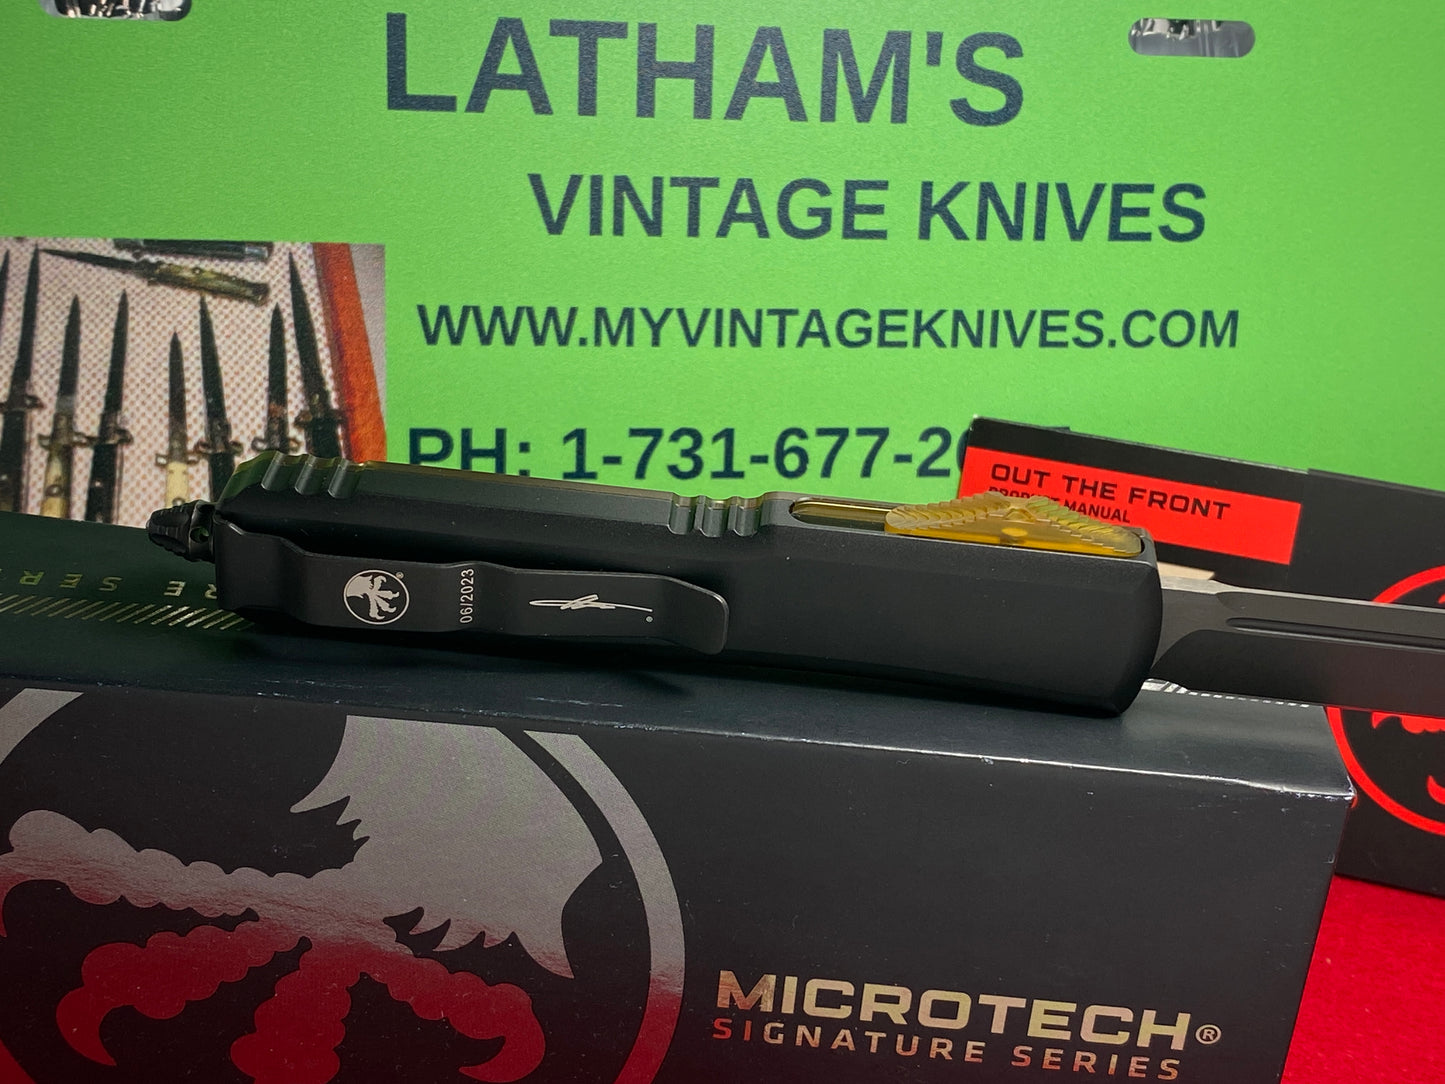 MICROTECH ULTRATECH S/E CPM MAGNACUT OTF 06/2023 SIGNATURE SERIES 121-1 DLCTULS ULTERM TOP AND BUTTON TACTICAL AUTOMATIC KNIFE CLEAR YELLOW FRONT HANDLE